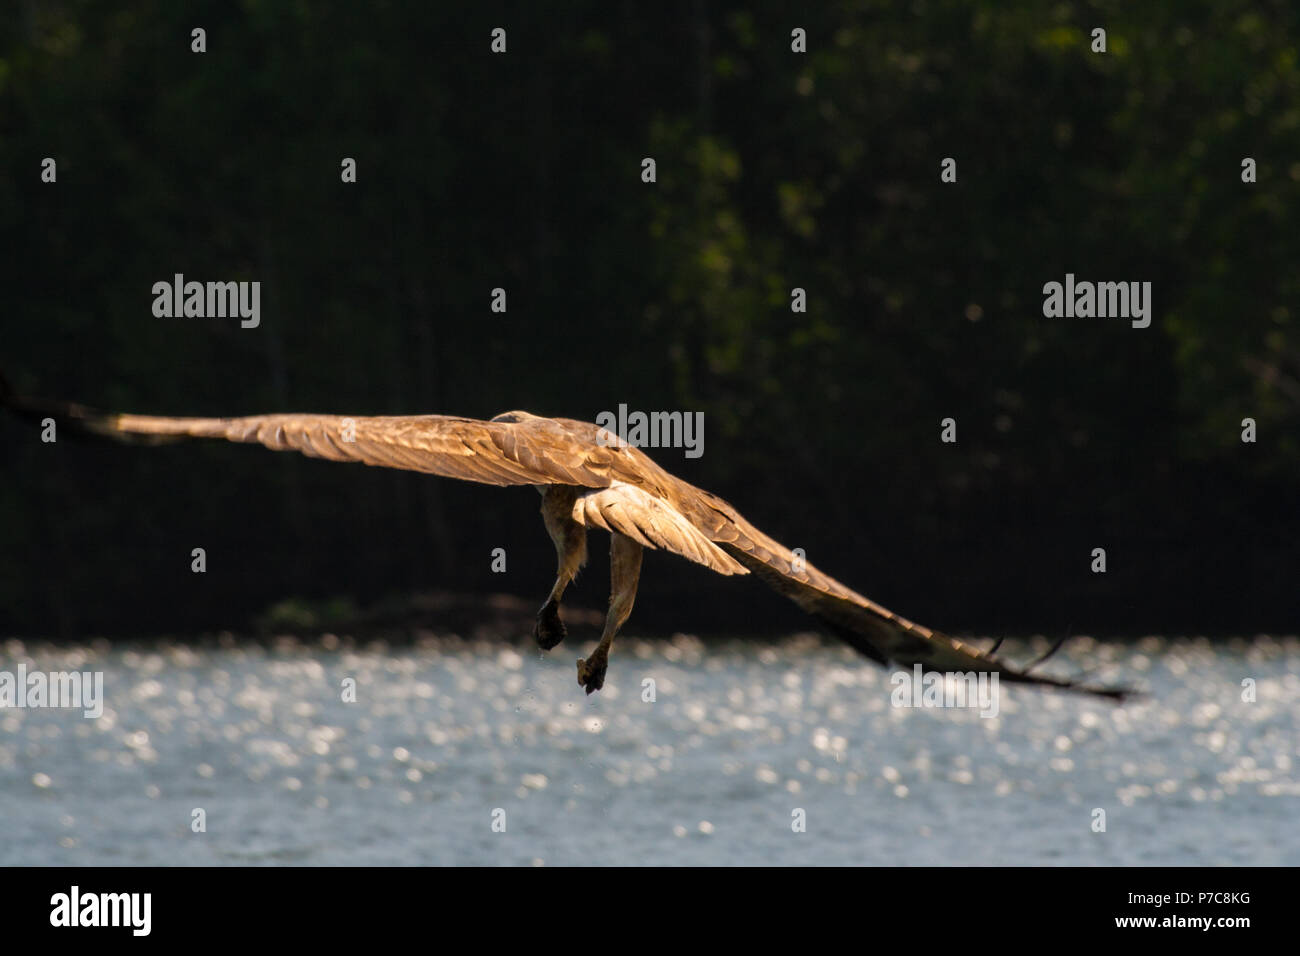 A wild brahminy kite (Haliastur indus) is flying away shortly after picking up food from the glinting water in the mangrove area of Kilim... Stock Photo